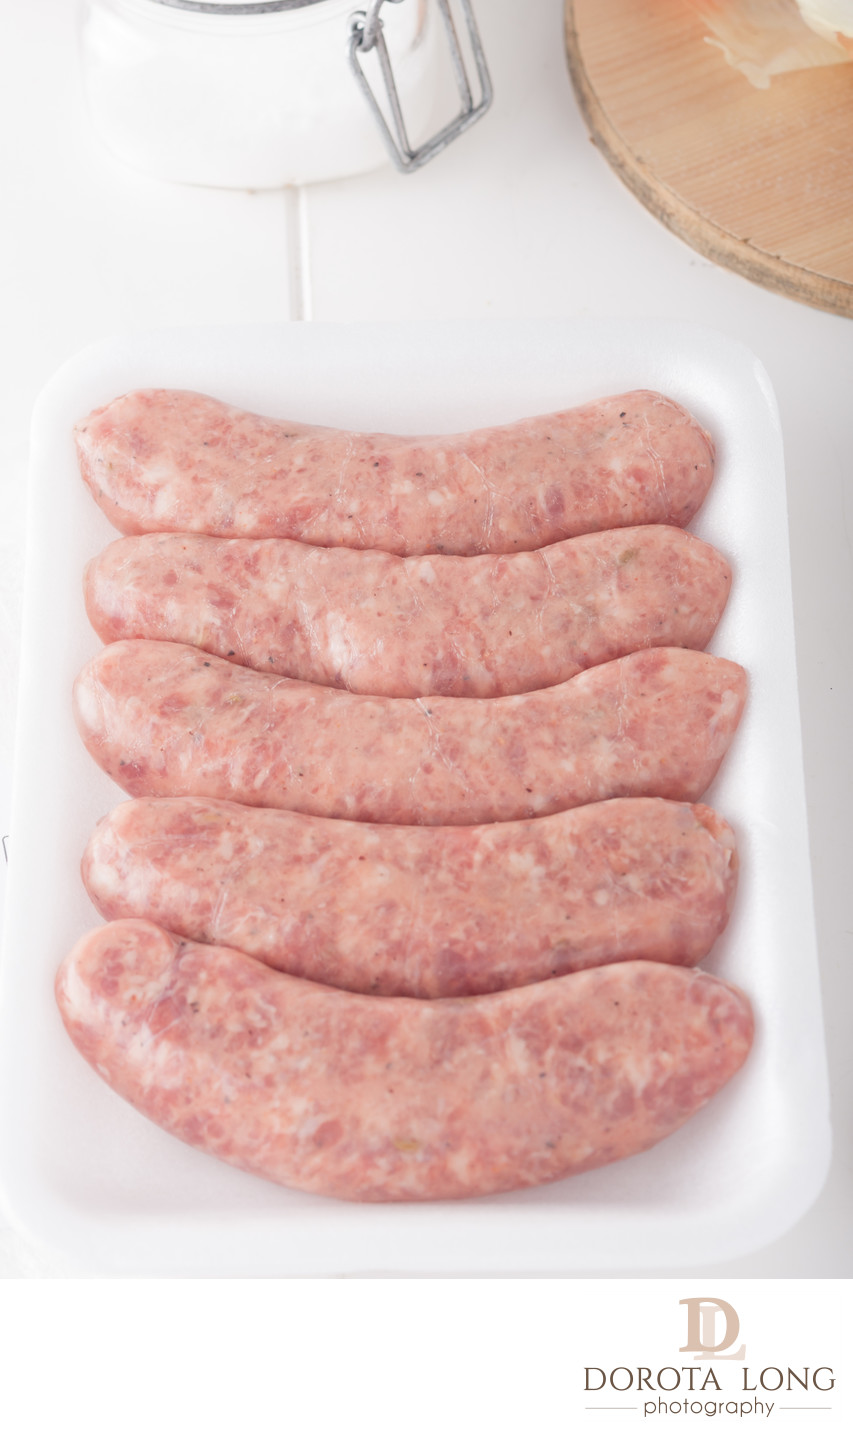 store bought meat sausages in packaging